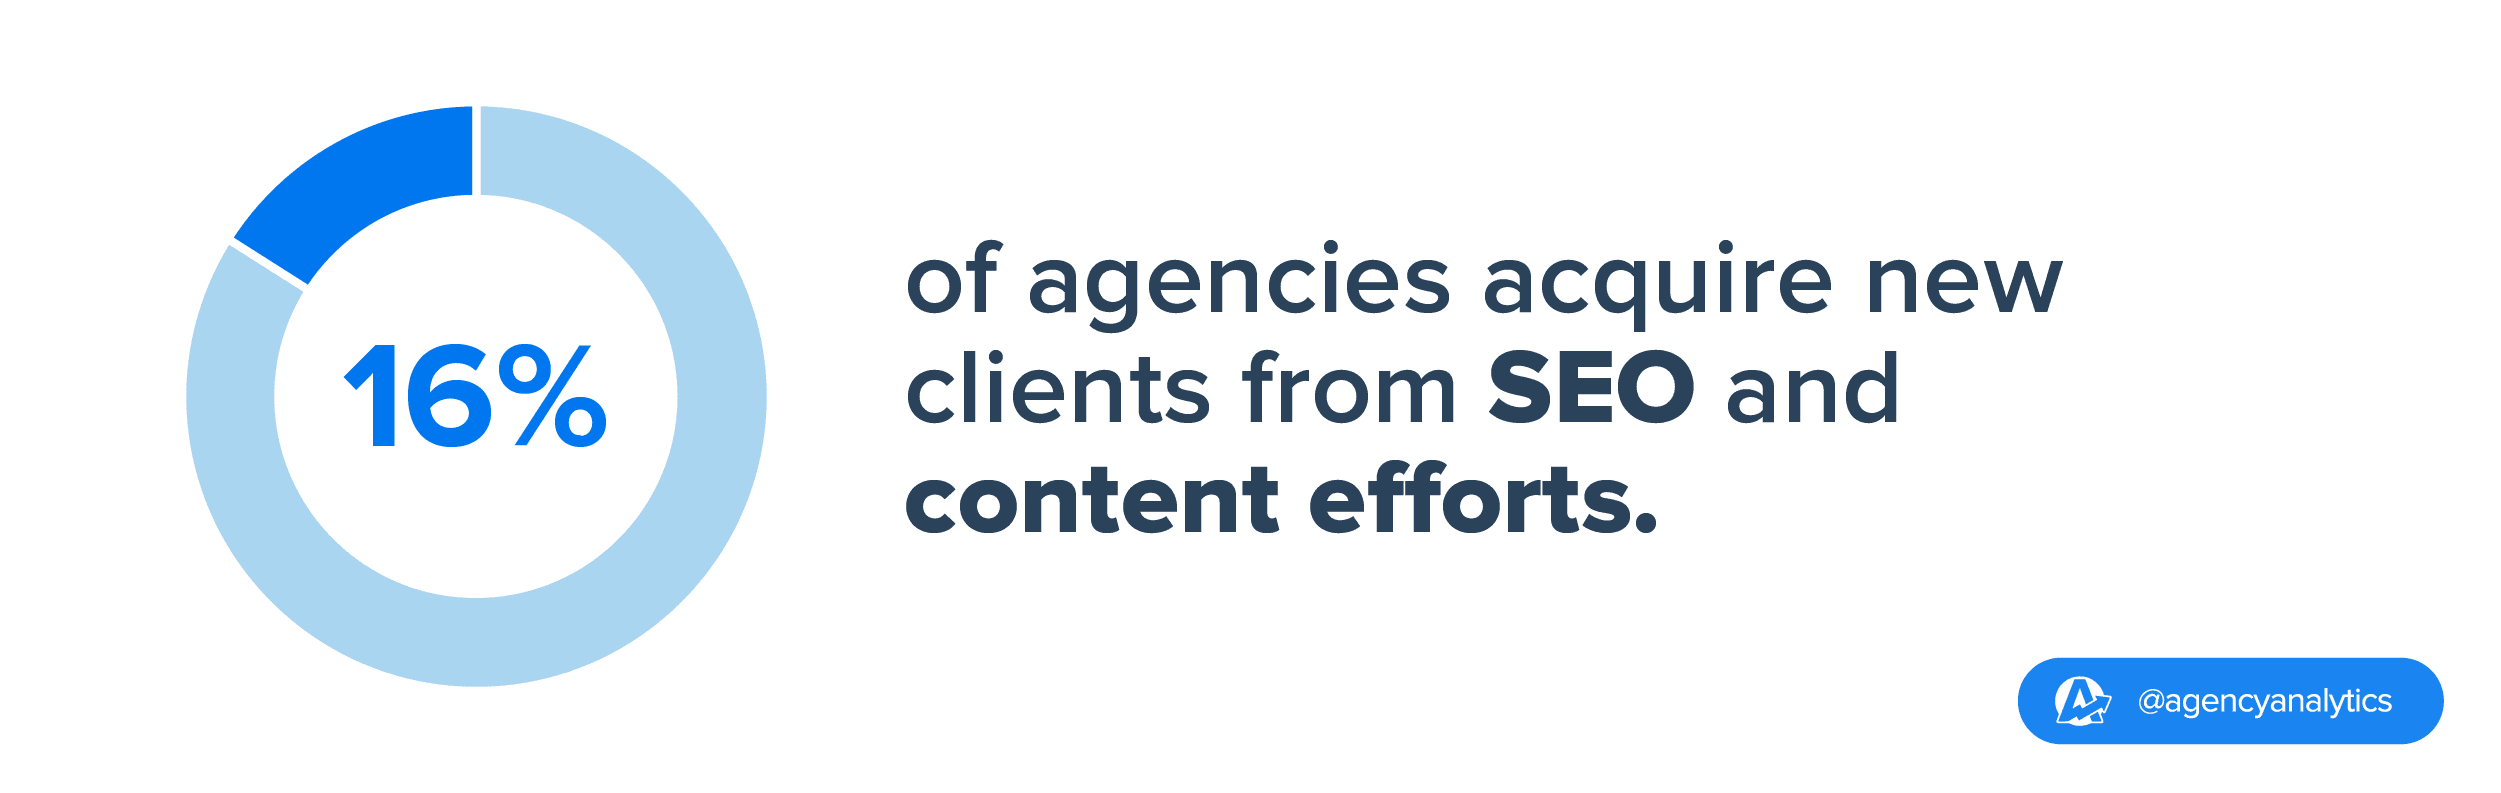 content and seo efforts to acquire new clients for agencies stat